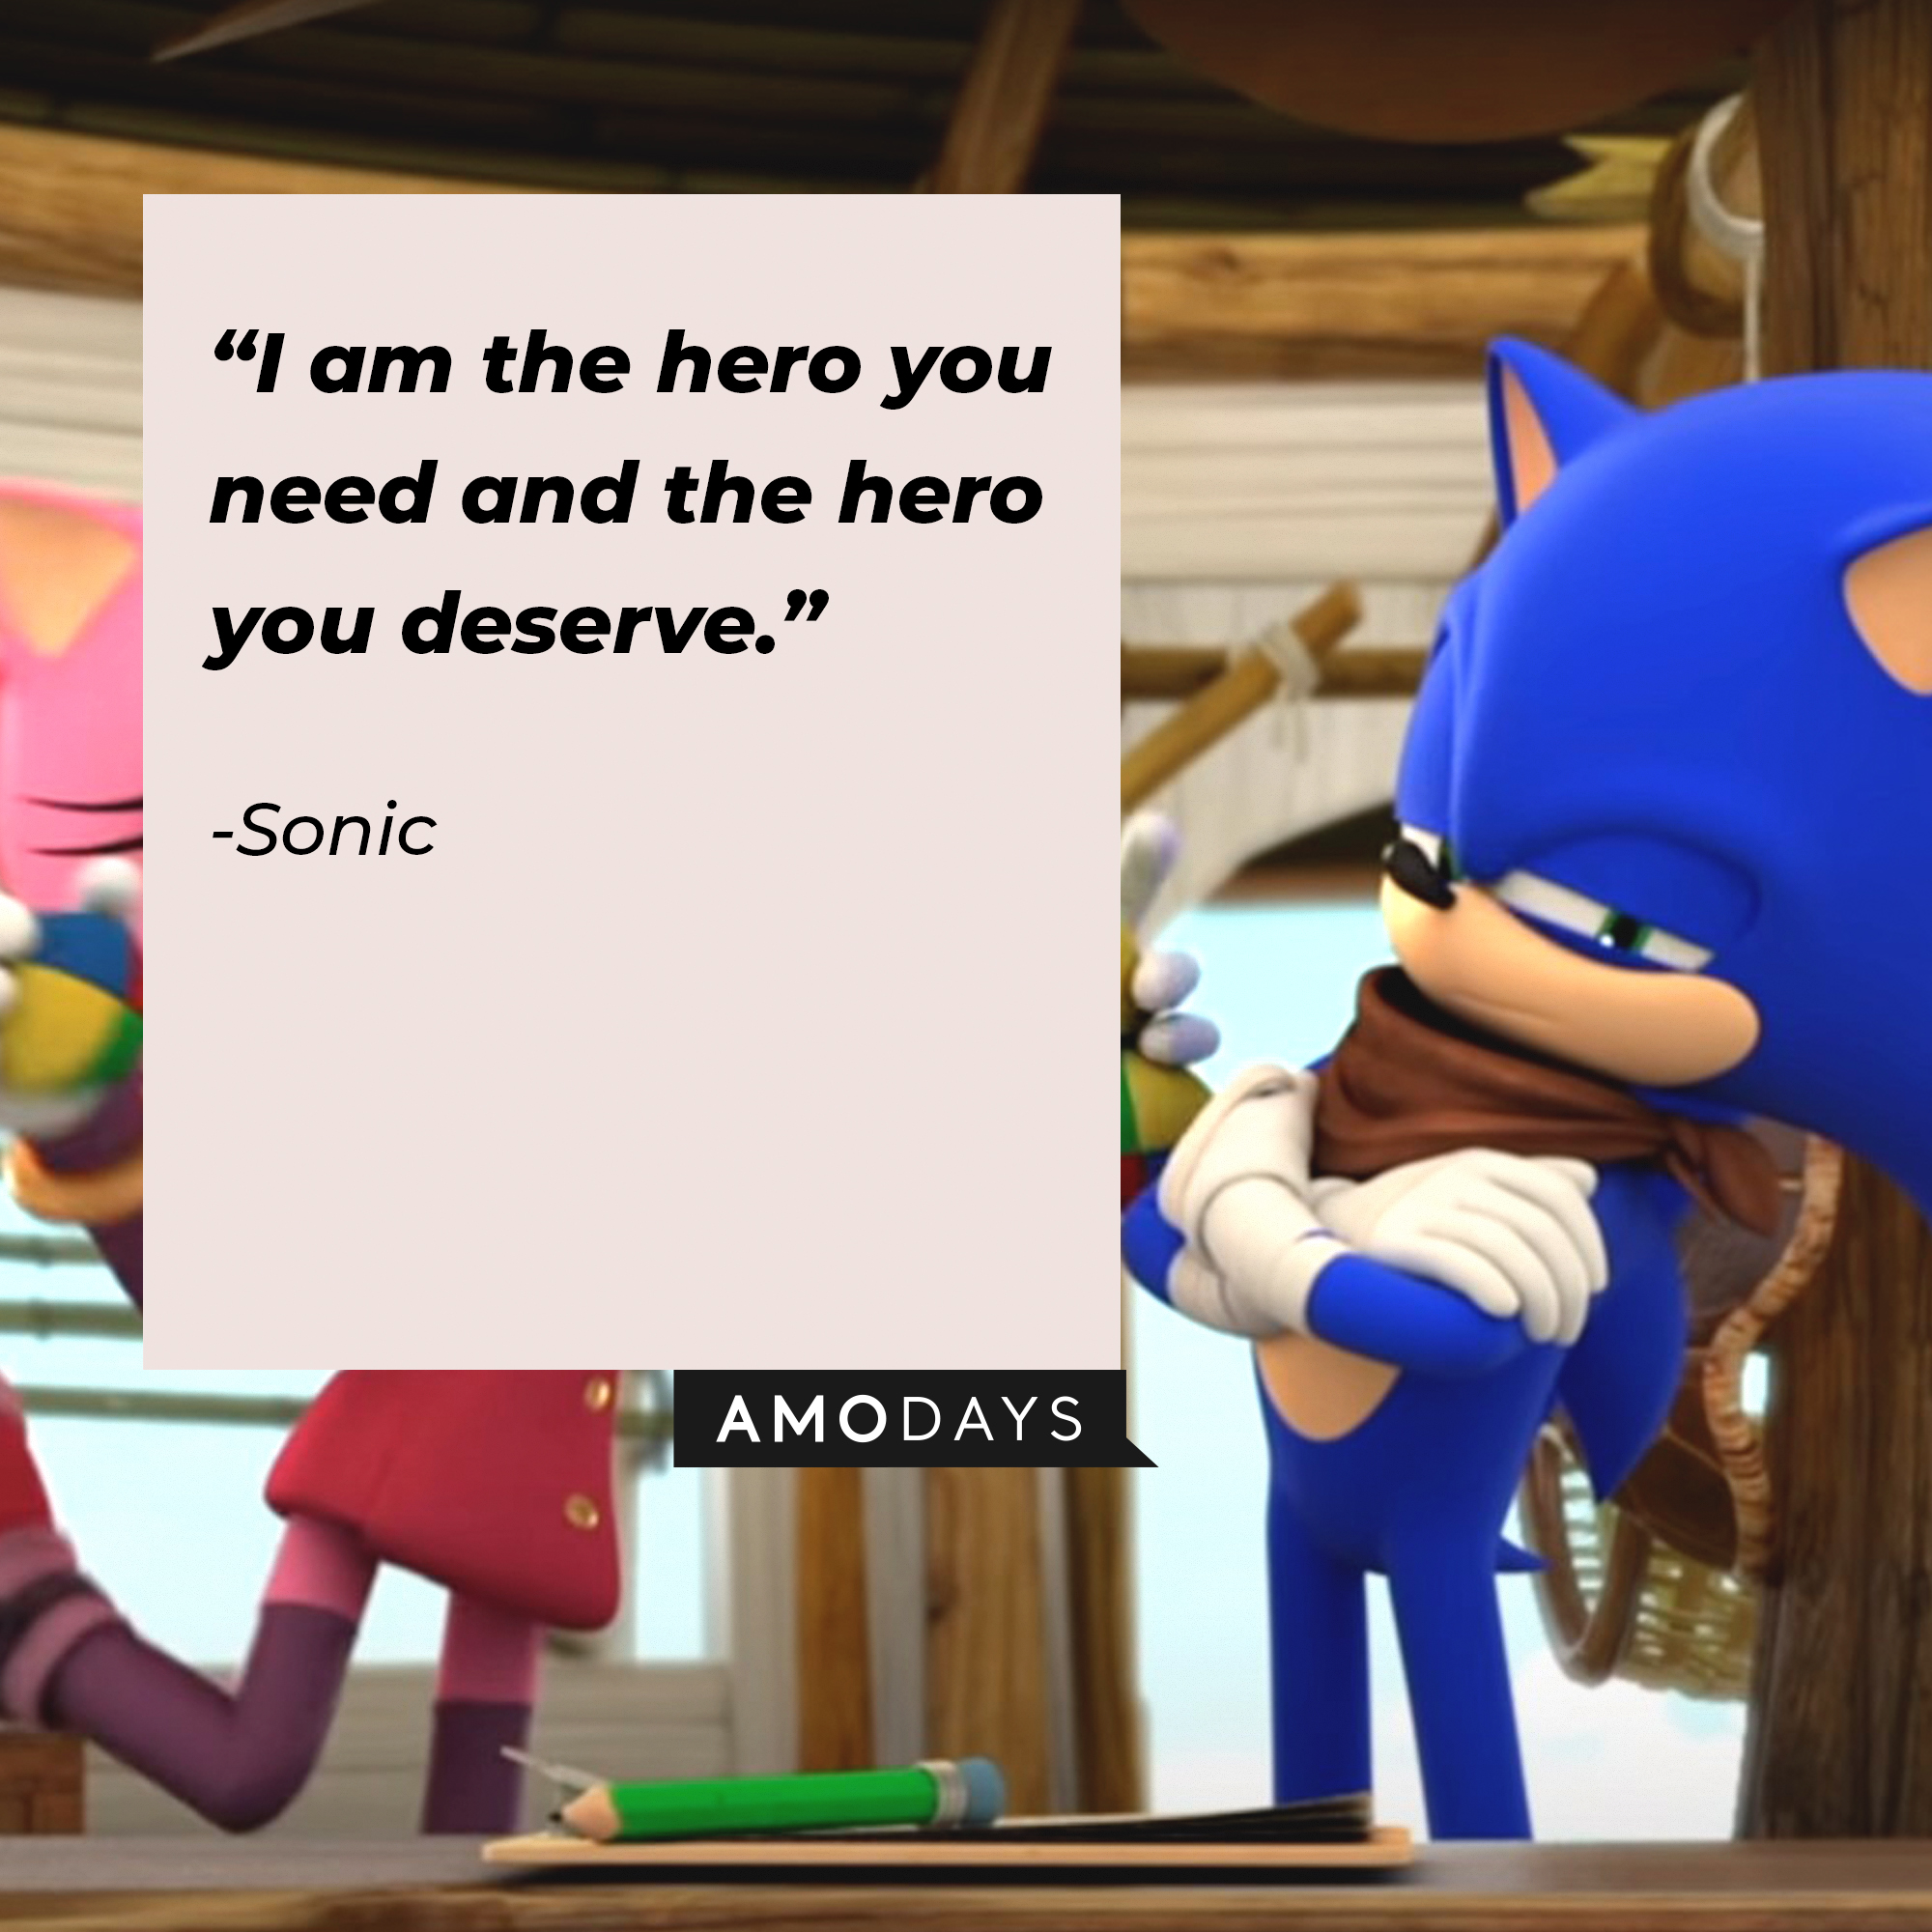 An image of Sonic the Hedgehog with his quote: “I am the hero you need and the hero you deserve.” | Source: youtube.com/Sonic.Boom_Official